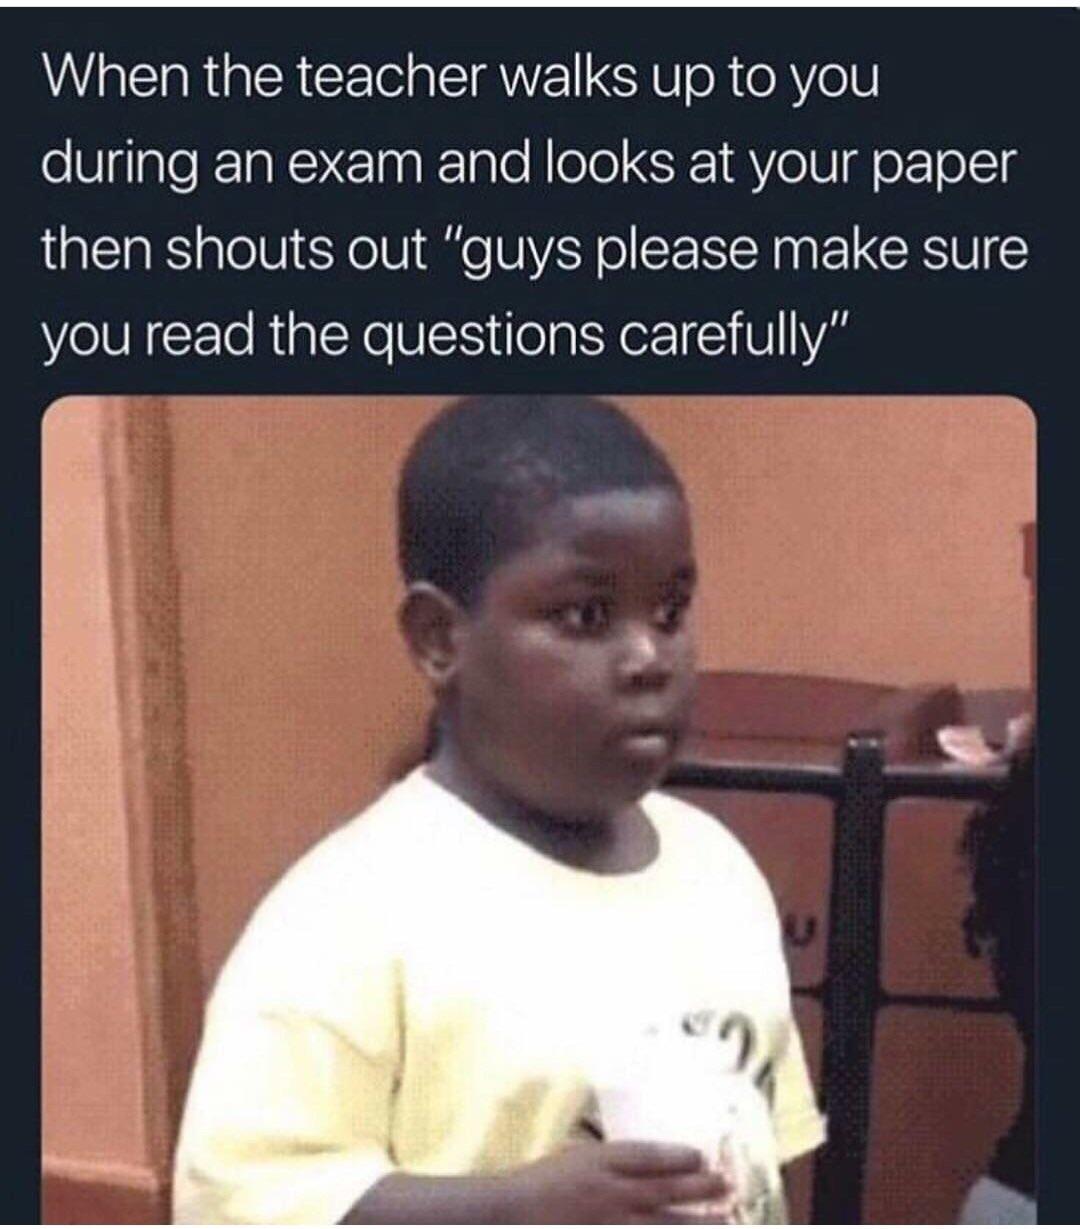 r/collegememes- college dank memes - funny stuff funny memes 2020 - When the teacher walks up to you during an exam and looks at your paper then shouts out